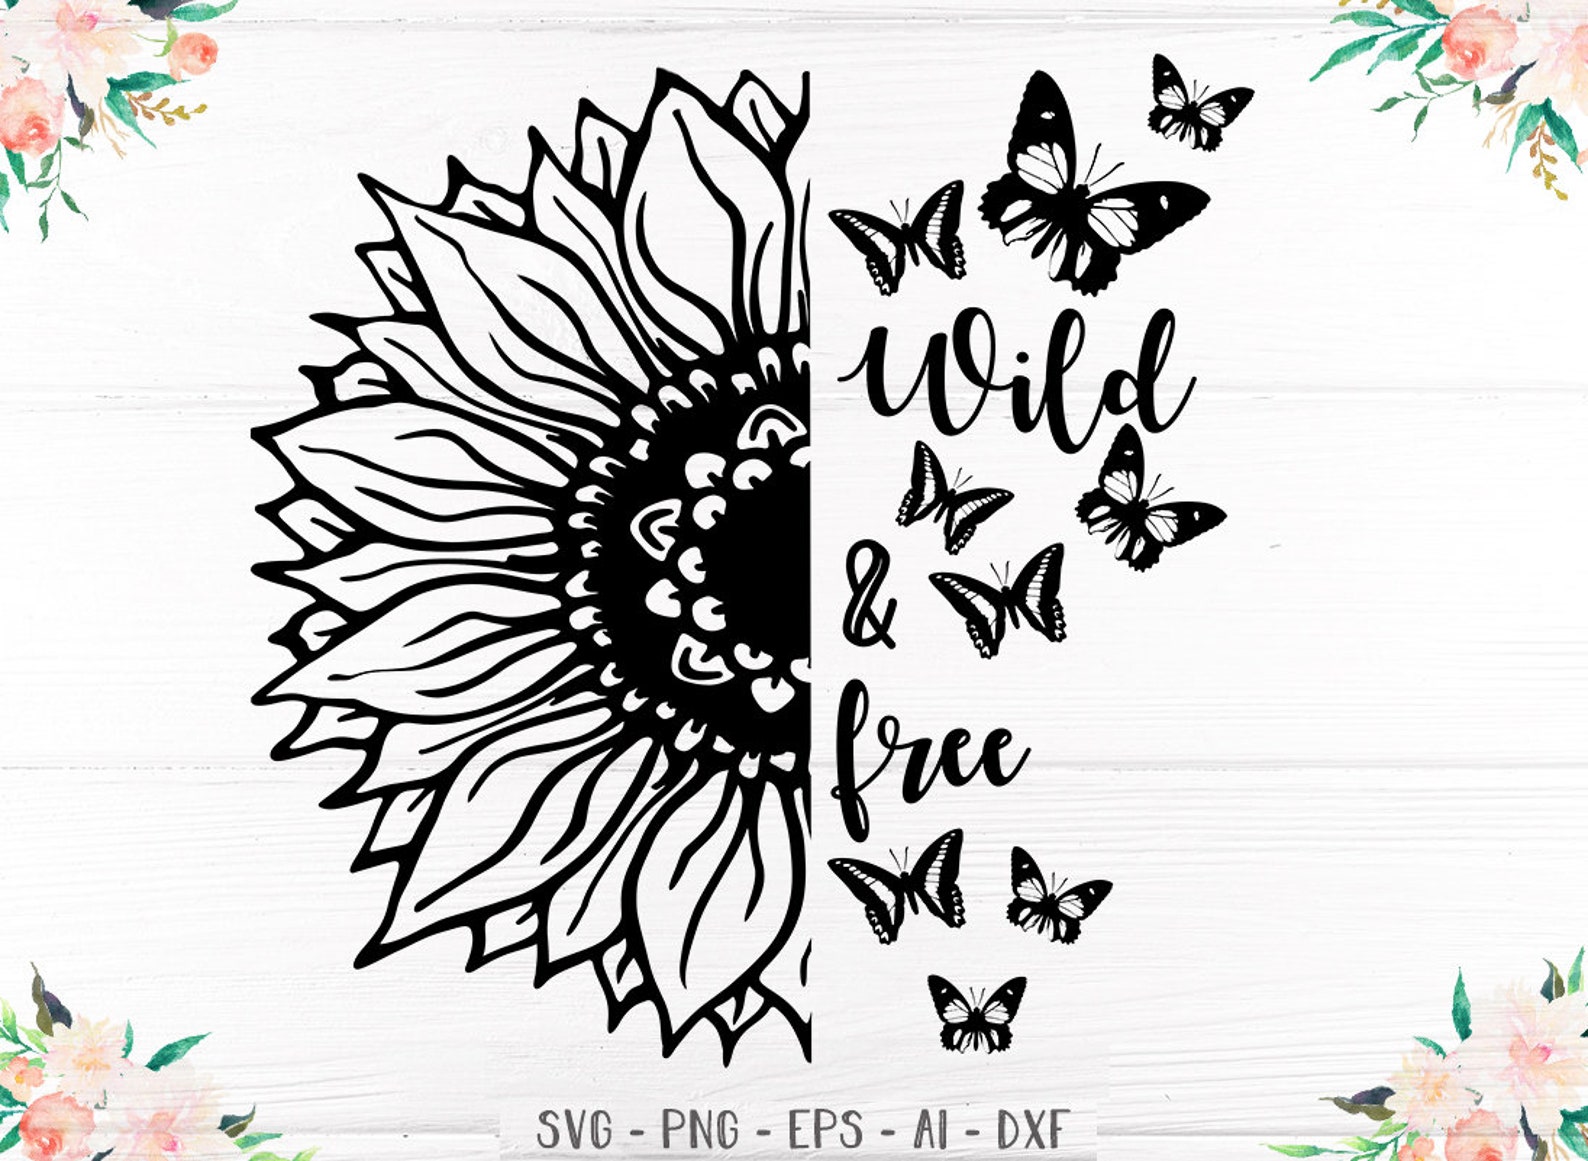 Sunflower SVG Butterfly Shirts PNG Wild and Free Clipart Horse - Etsy